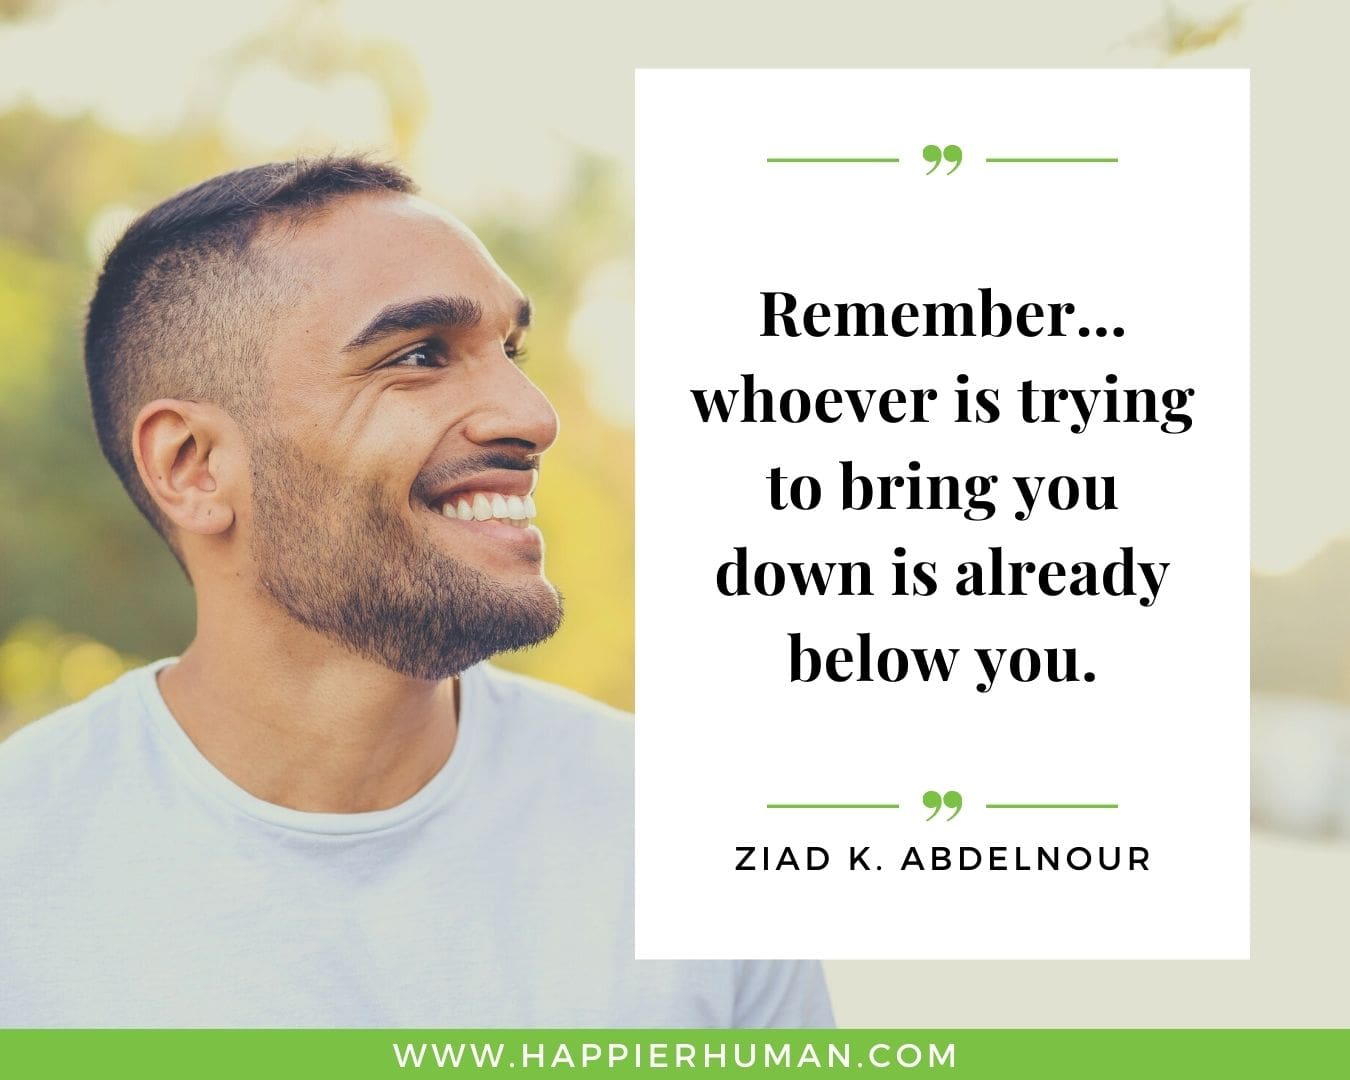 Toxic People Quotes - “Remember… whoever is trying to bring you down is already below you.” – Ziad K. Abdelnour